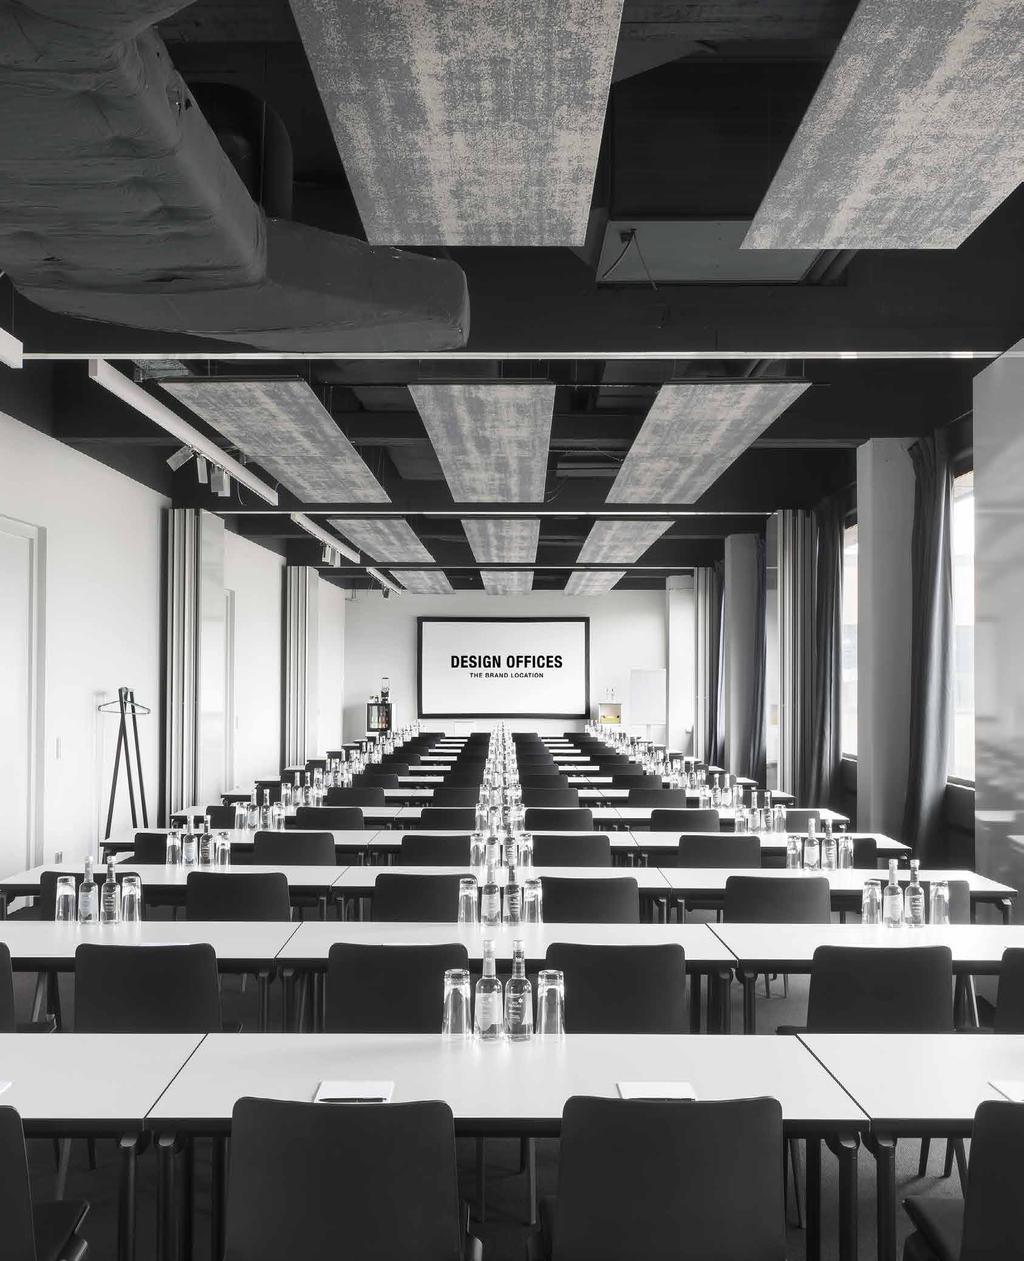 CONFERENCE SPACES WHERE KNOWLEDGE IS GENERATED Meetings are where you set the course for your future success. This calls for optimum flexibility guaranteed with our Conference Spaces.